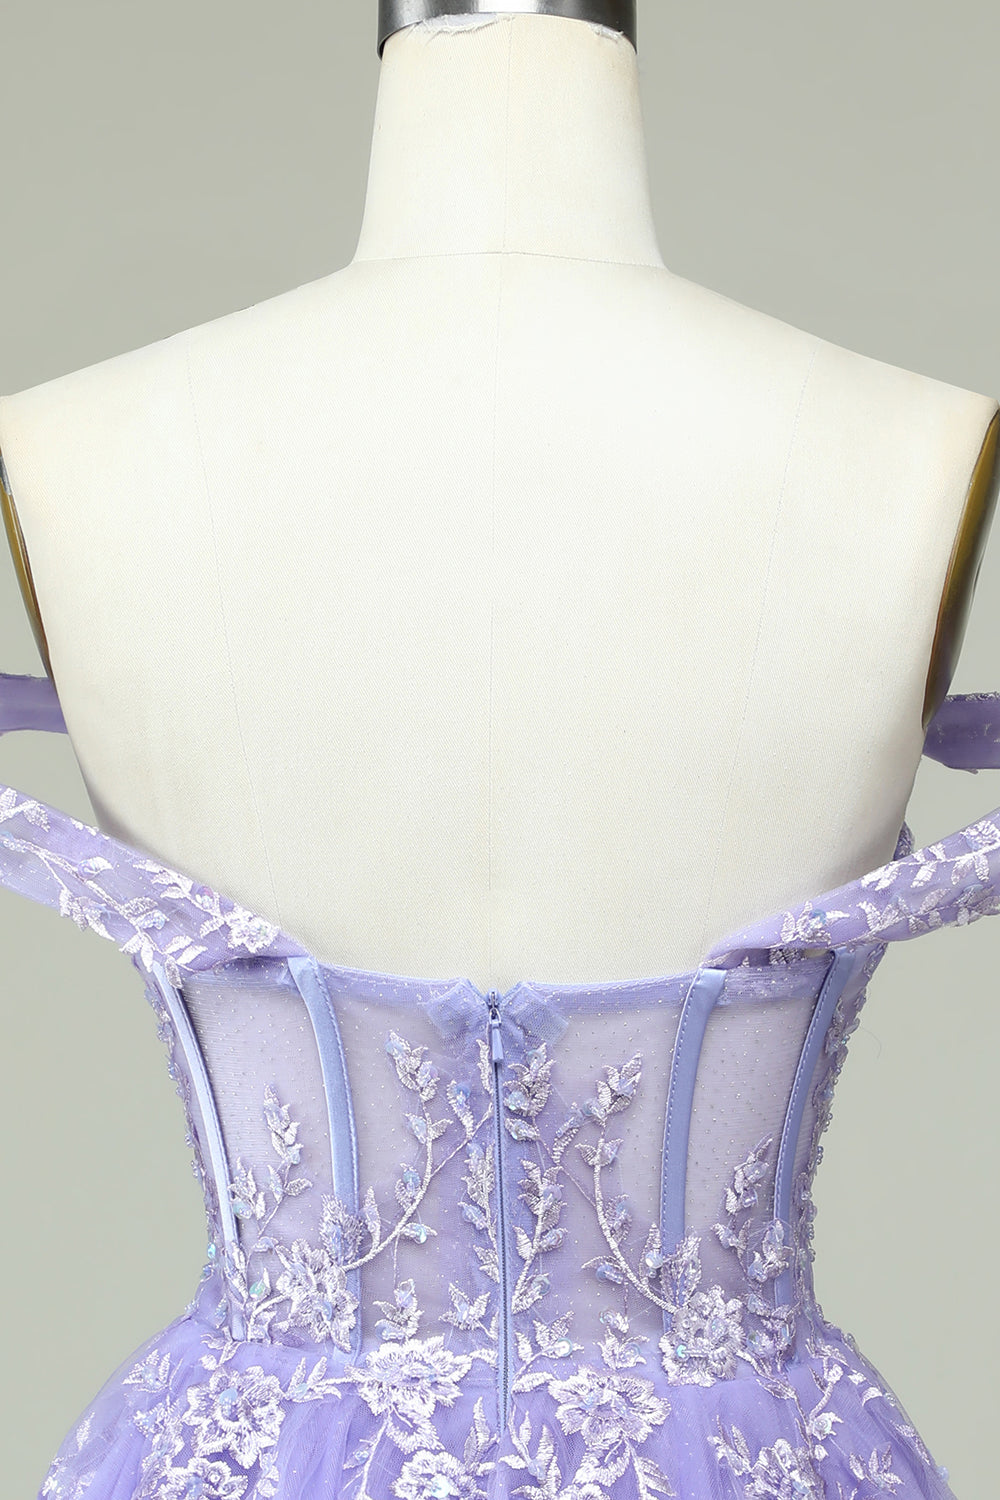 Off The Shoulder Lilac Corset Straps A-Line Short Homecoming Dress